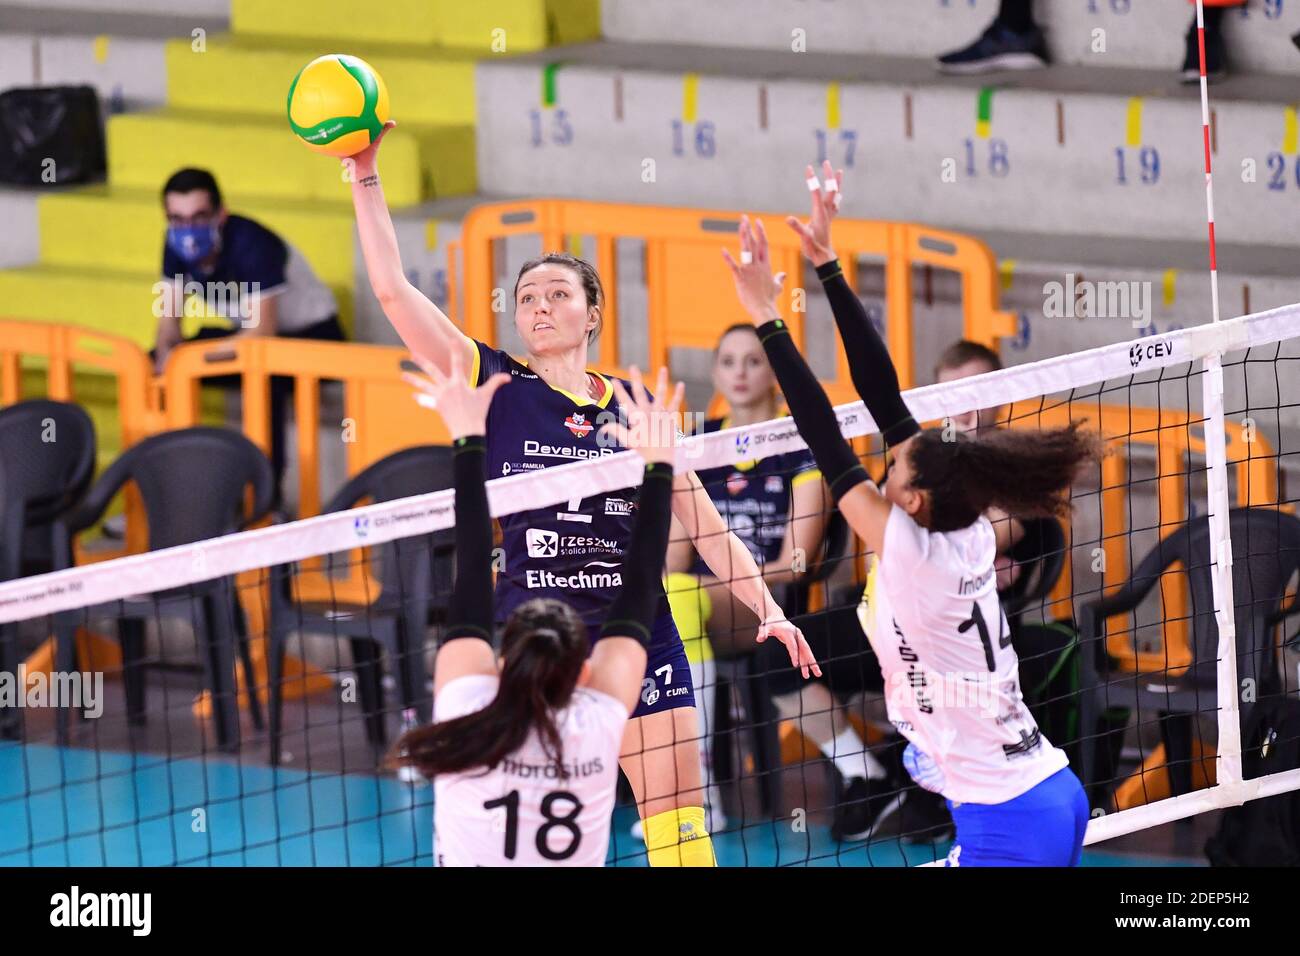 Scandicci, Florence, Italy. 1st Dec, 2020. scandicci, florence, Italy, Palazzetto dello Sport, 01 Dec 2020, Jelena Blagojevic (Developres SkyRes Rzeszow) during SSC Palmberg Schwerin vs Developres SkyRes Rzeszow - CEV Champions League Women volleyball match Credit: Lisa Guglielmi/LPS/ZUMA Wire/Alamy Live News Stock Photo